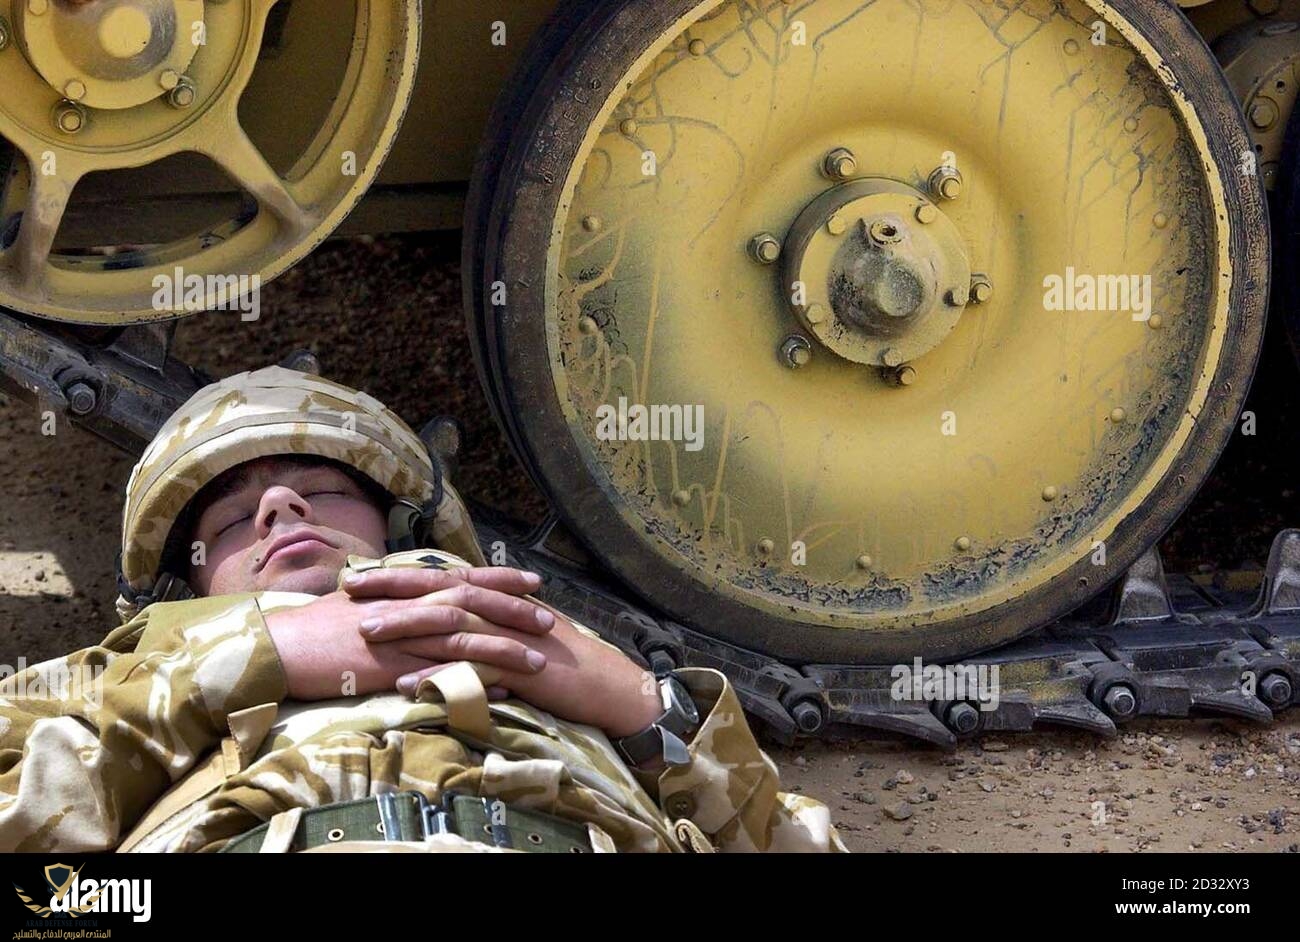 an-exhausted-scimitar-commander-of-the-household-cavalry-regiment-catching-up-on-his-sleep-in-...jpg